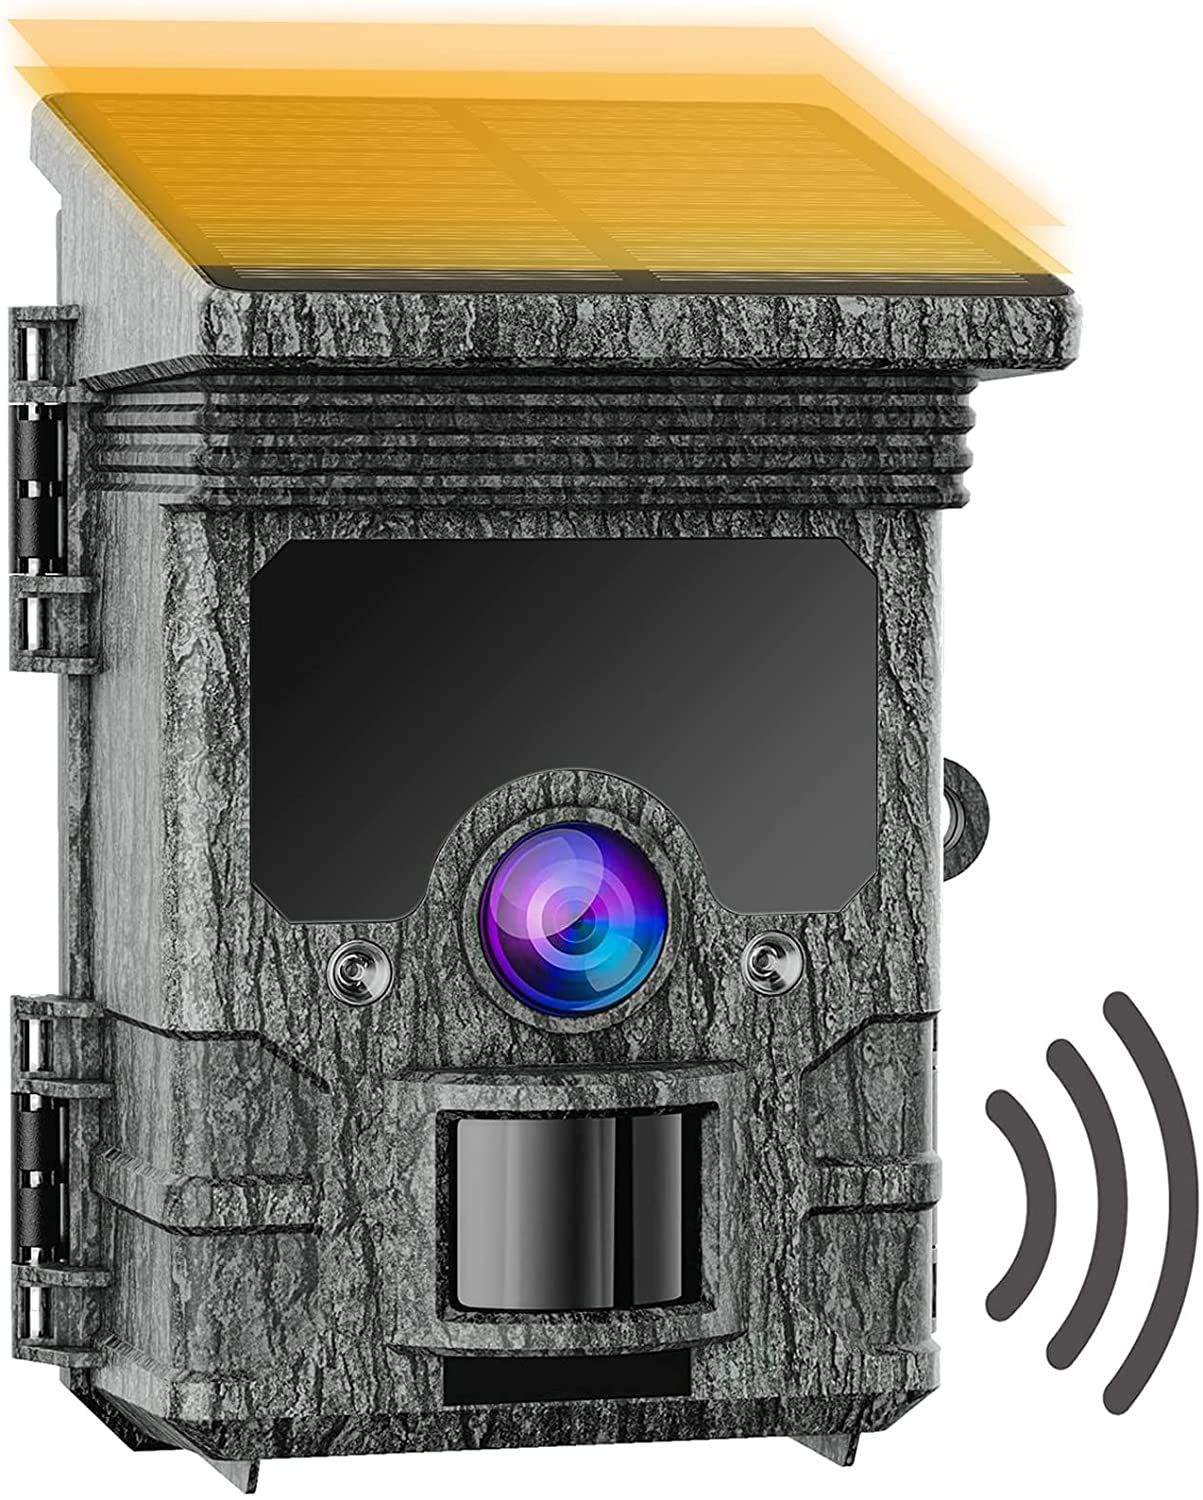 CAMPARK Solar Powered Trail Camera Native 4K 30fps WiFi Game Deer Camera 4400mAh 30MP Bluetooth Hunting Camera with Infrared Night Vision Motion Activated Waterproof Trail Cam for Wildlife Monitoring